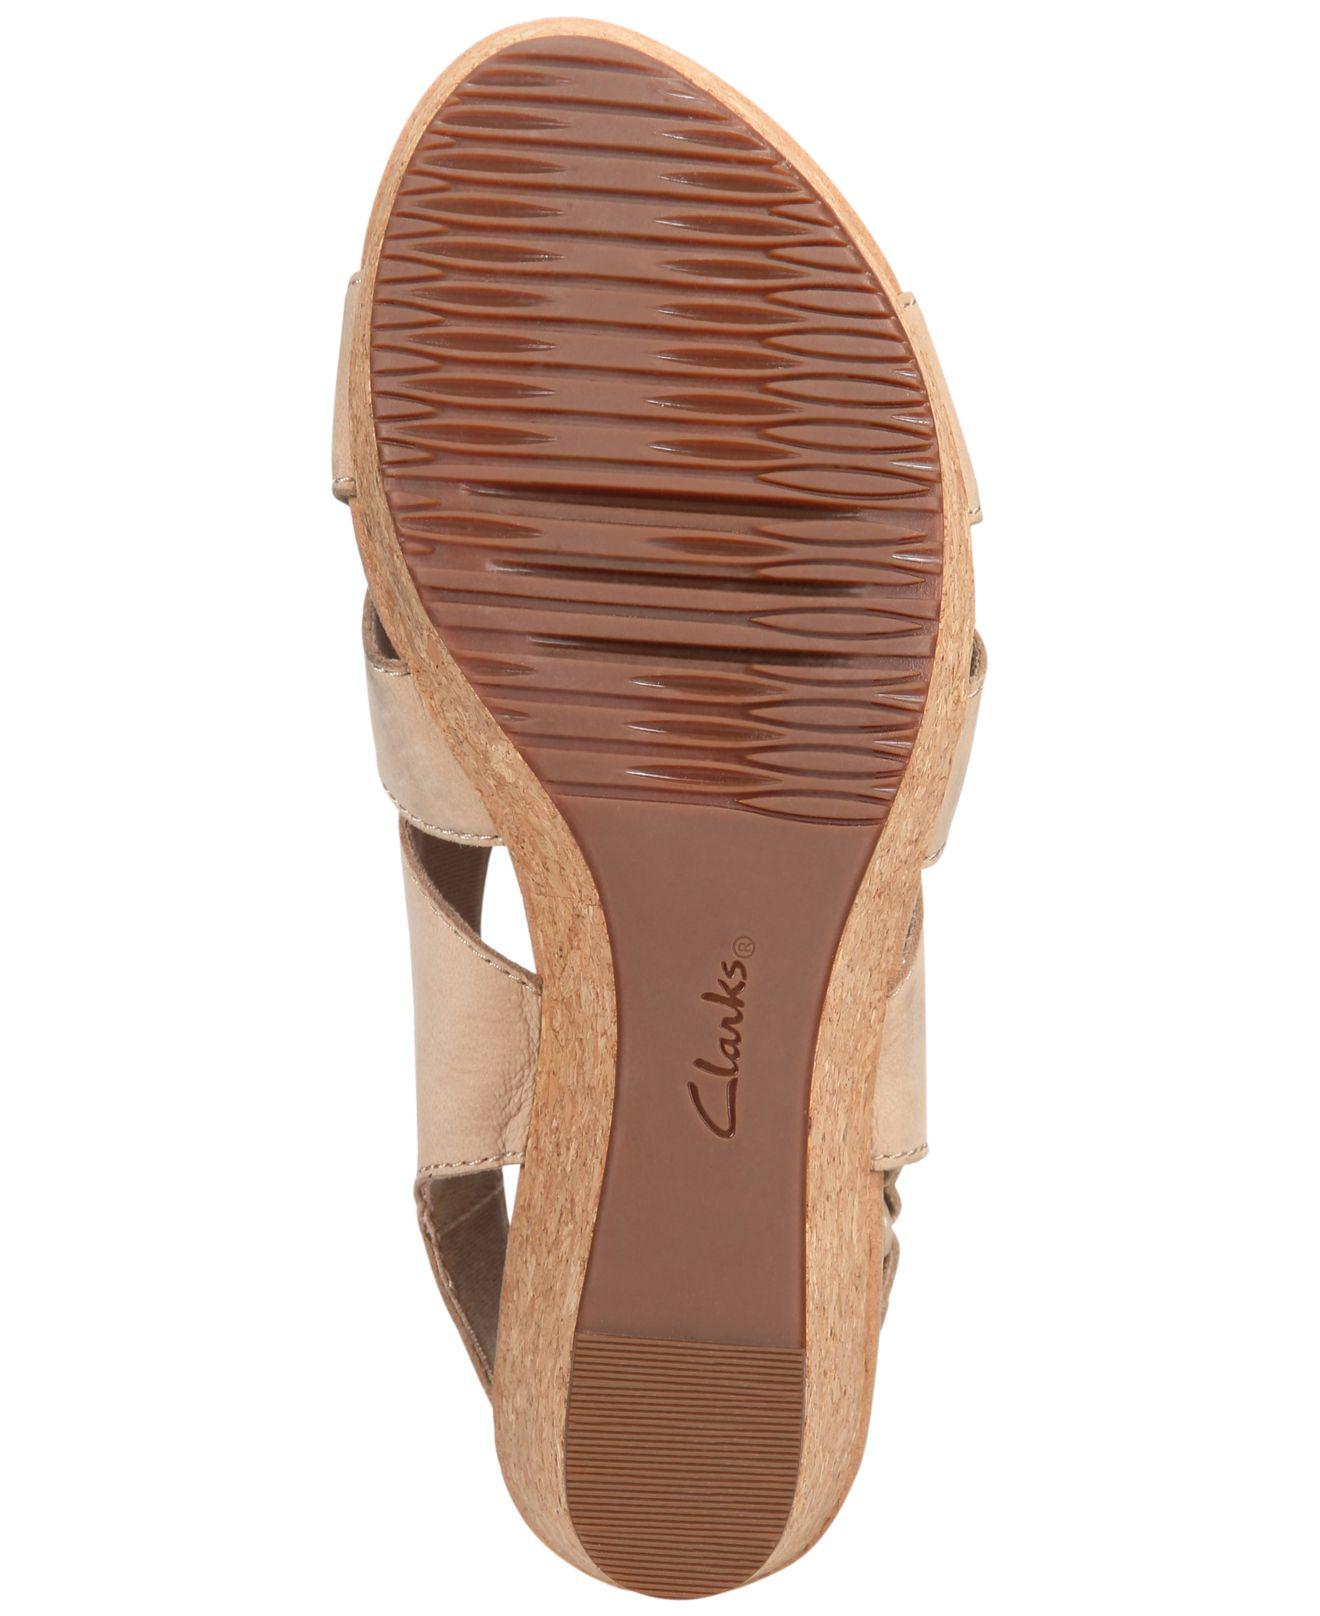 Clarks Annadel Sandals in Natural | Lyst